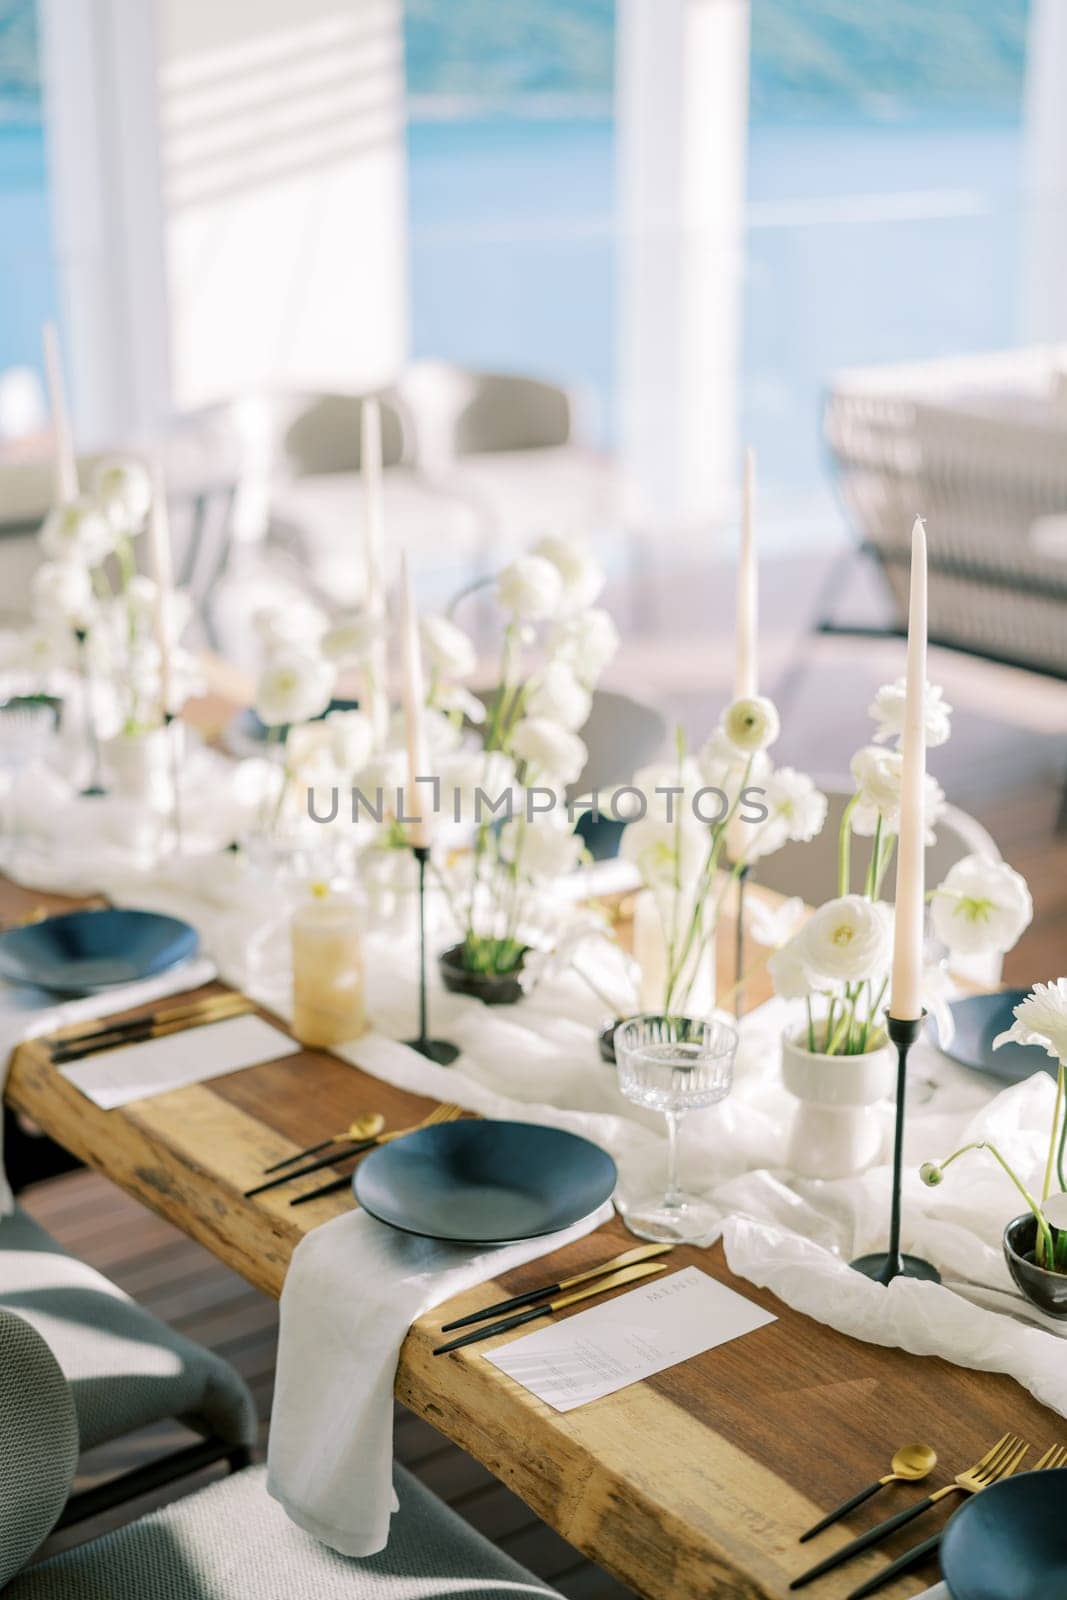 Black plates on white napkins stand next to gold cutlery and menus on a holiday table with white flowers by Nadtochiy